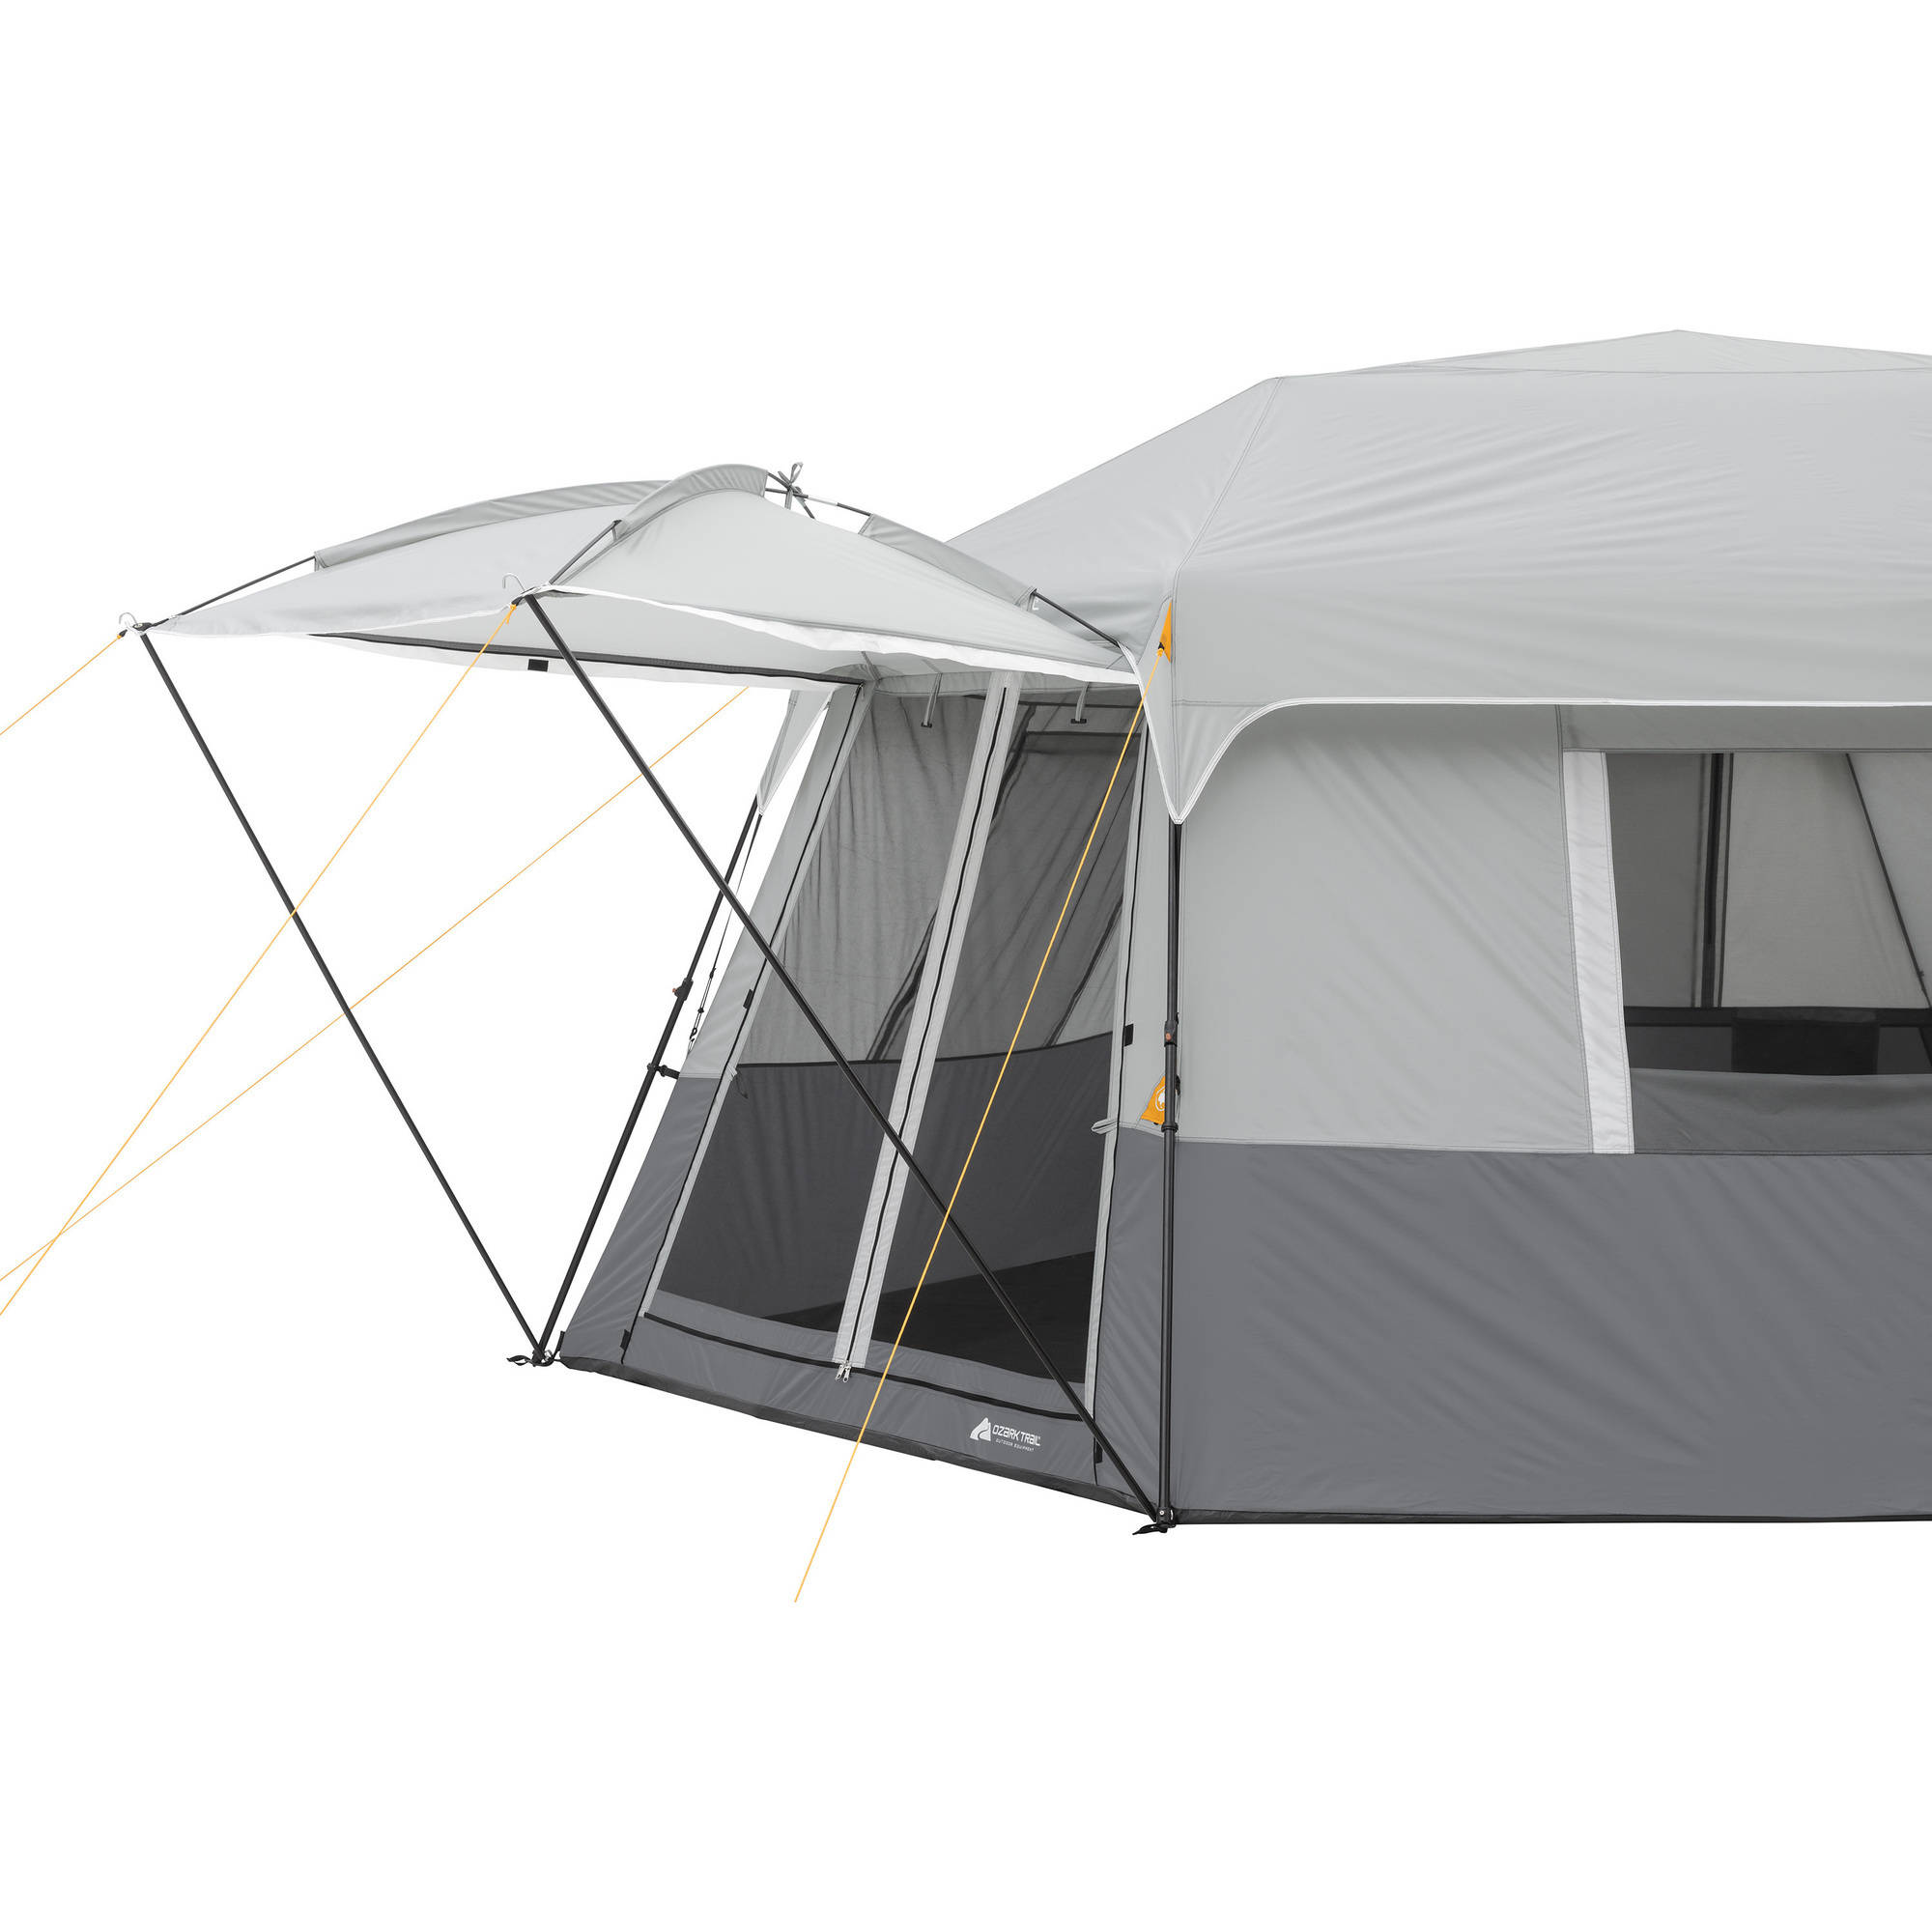 Ozark Trail 17' x 15' Person Instant Hexagon Cabin Tent, Sleeps 11 - image 5 of 15